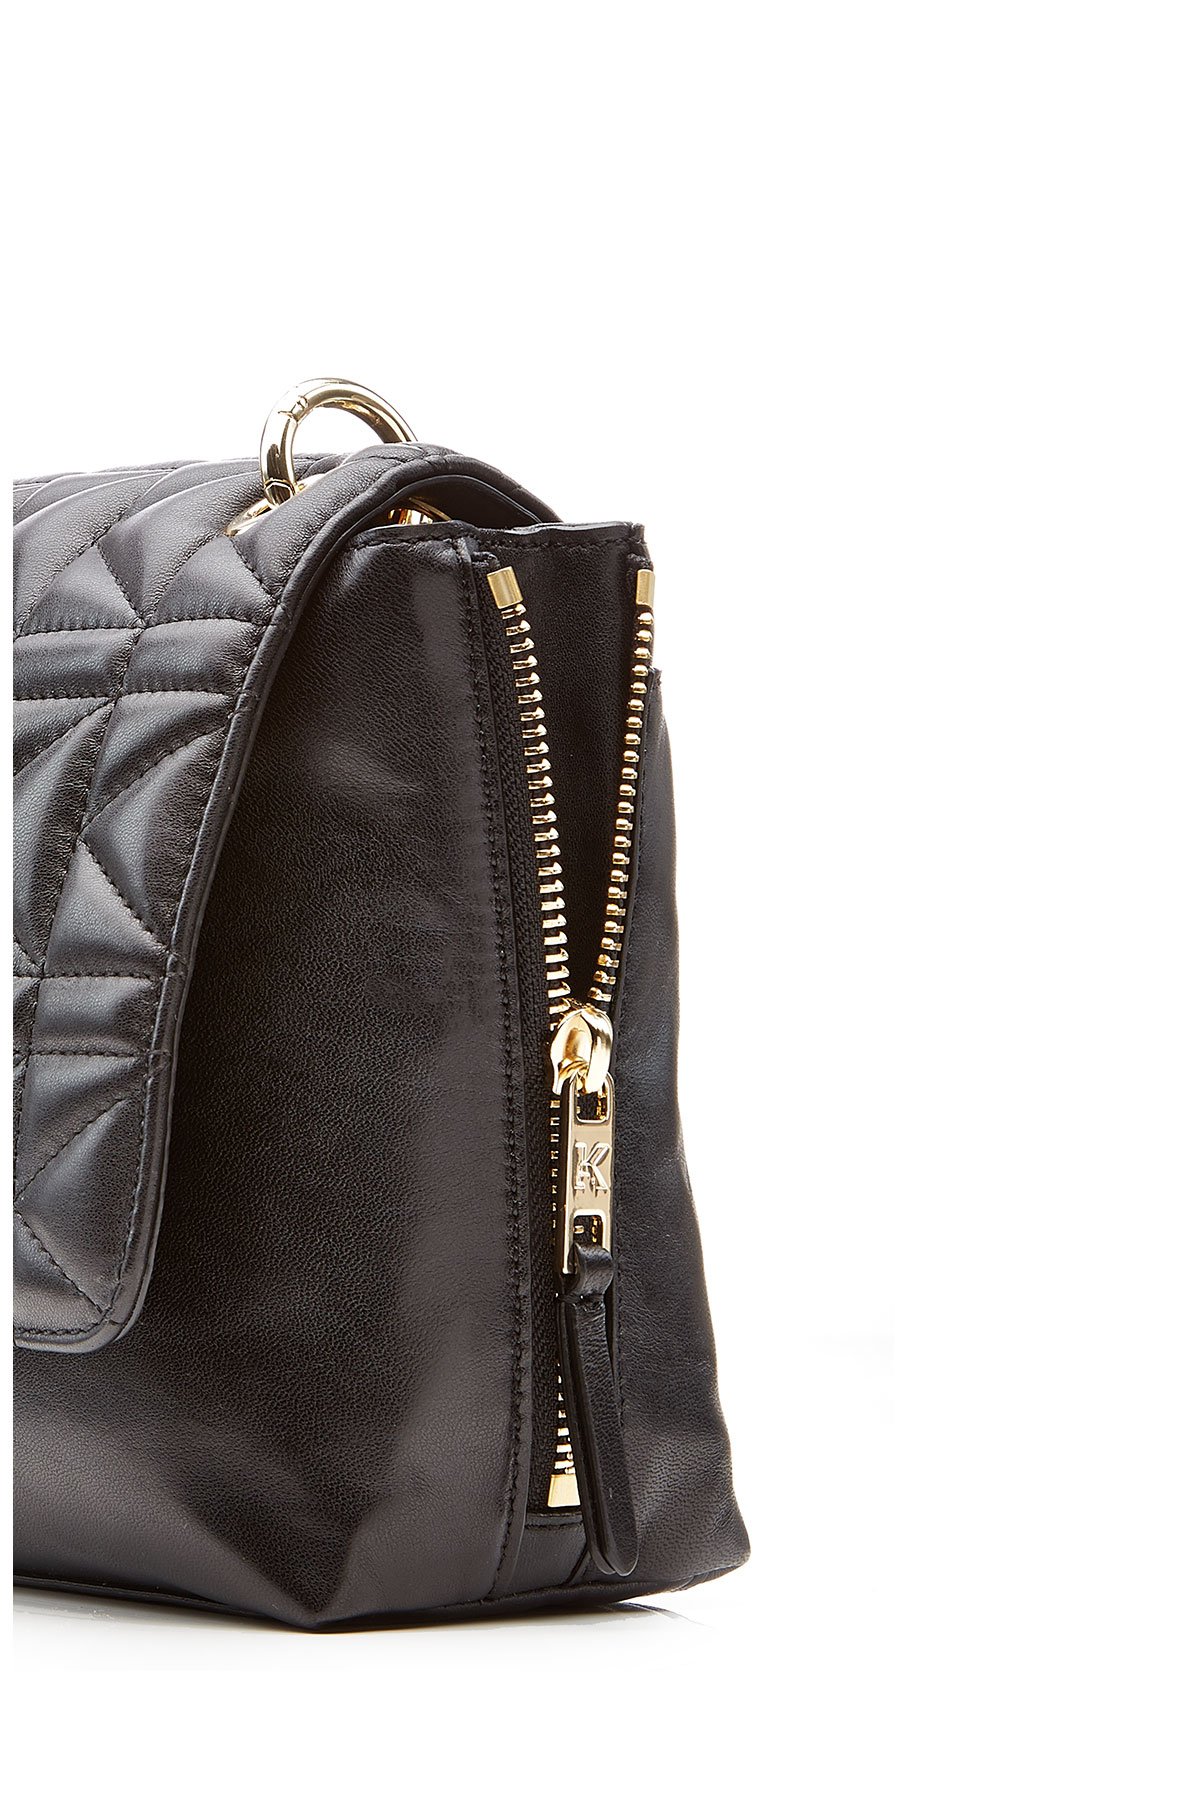 Lyst - Karl Lagerfeld Quilted Leather Shoulder Bag in Black